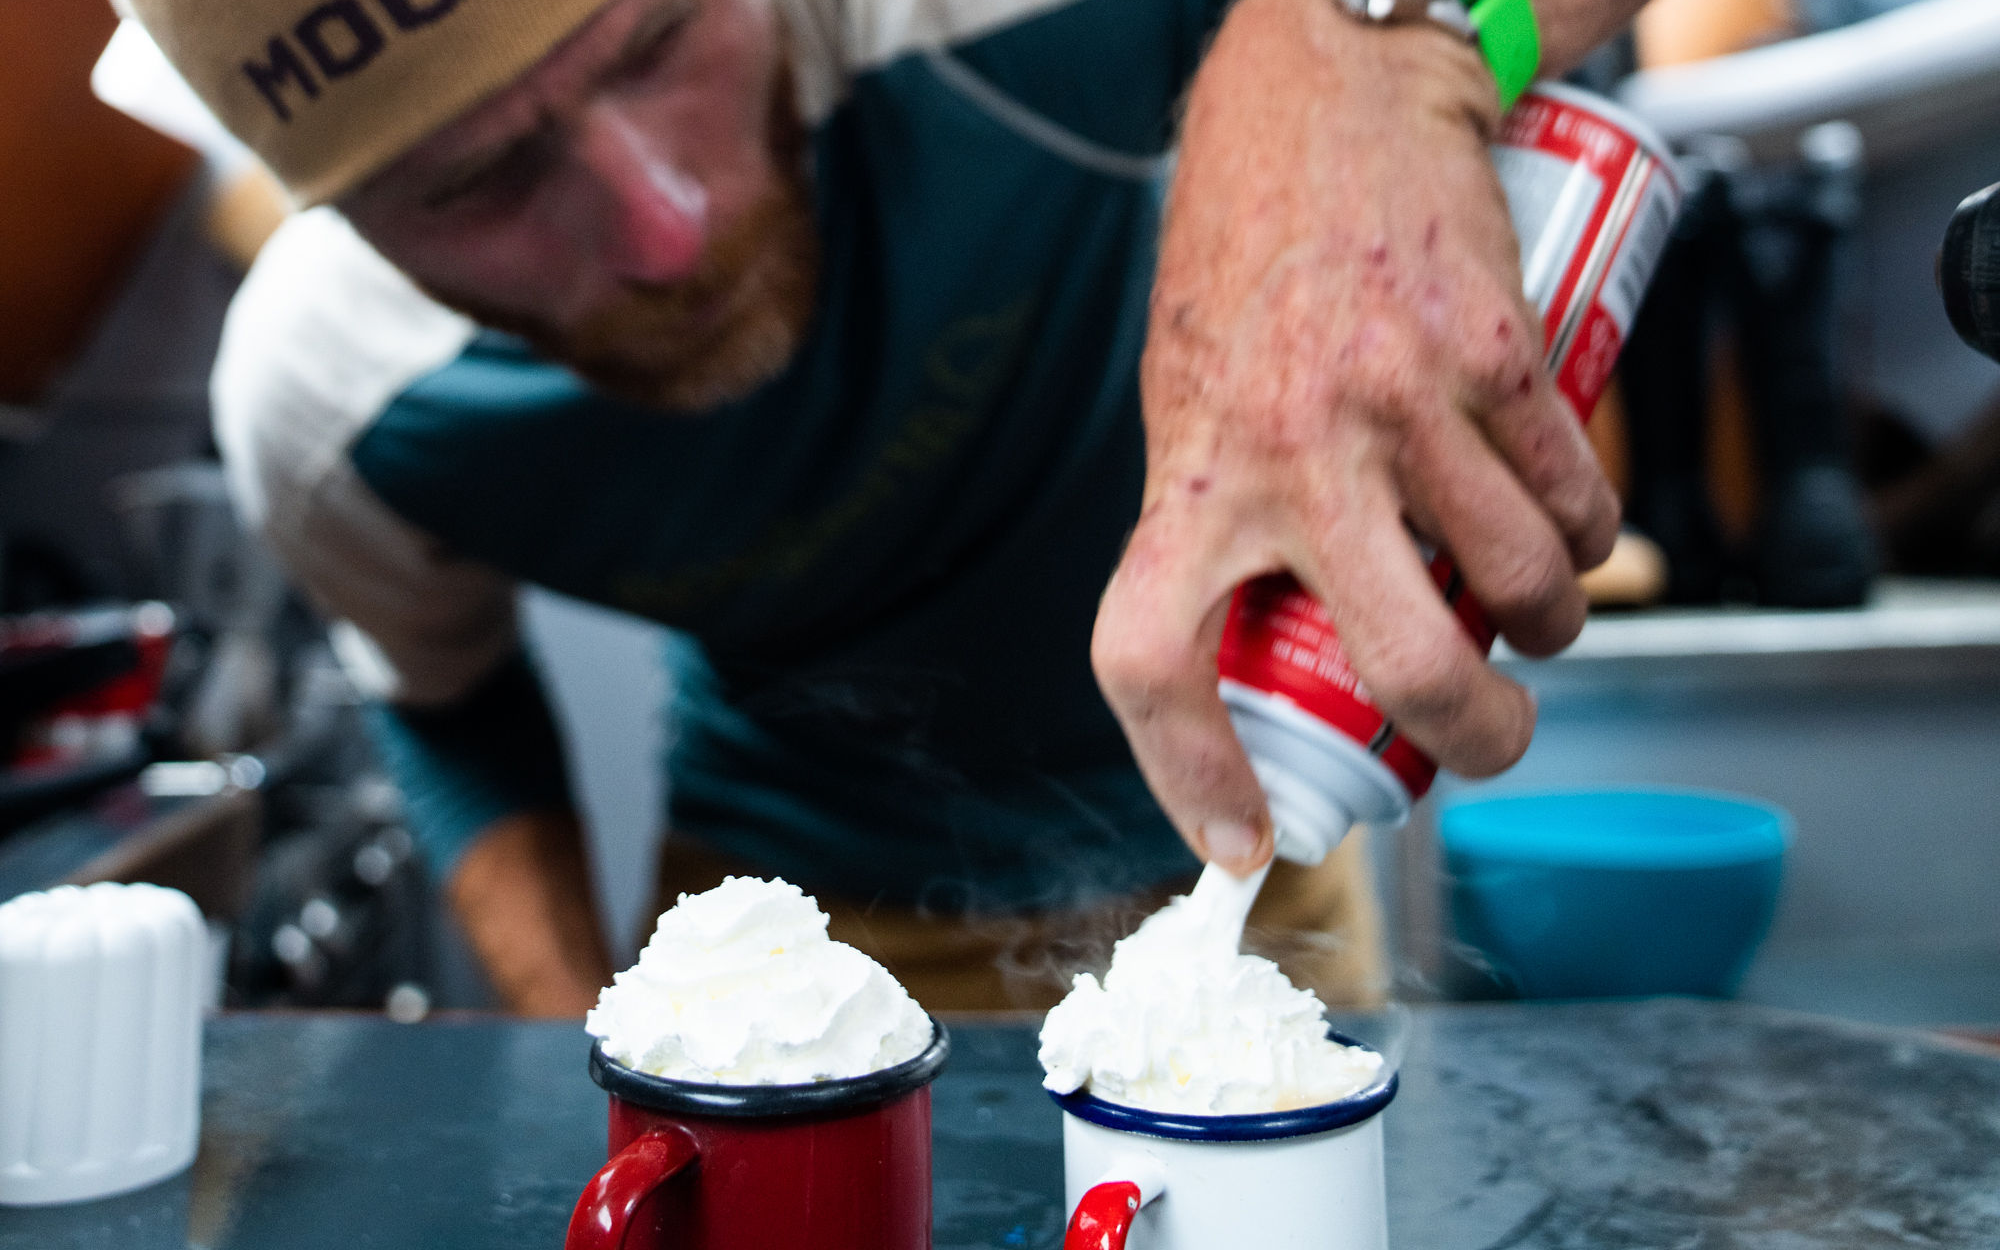 Captain Ben fixes up two hot chocolates, topping off both mugs with whipped cream.